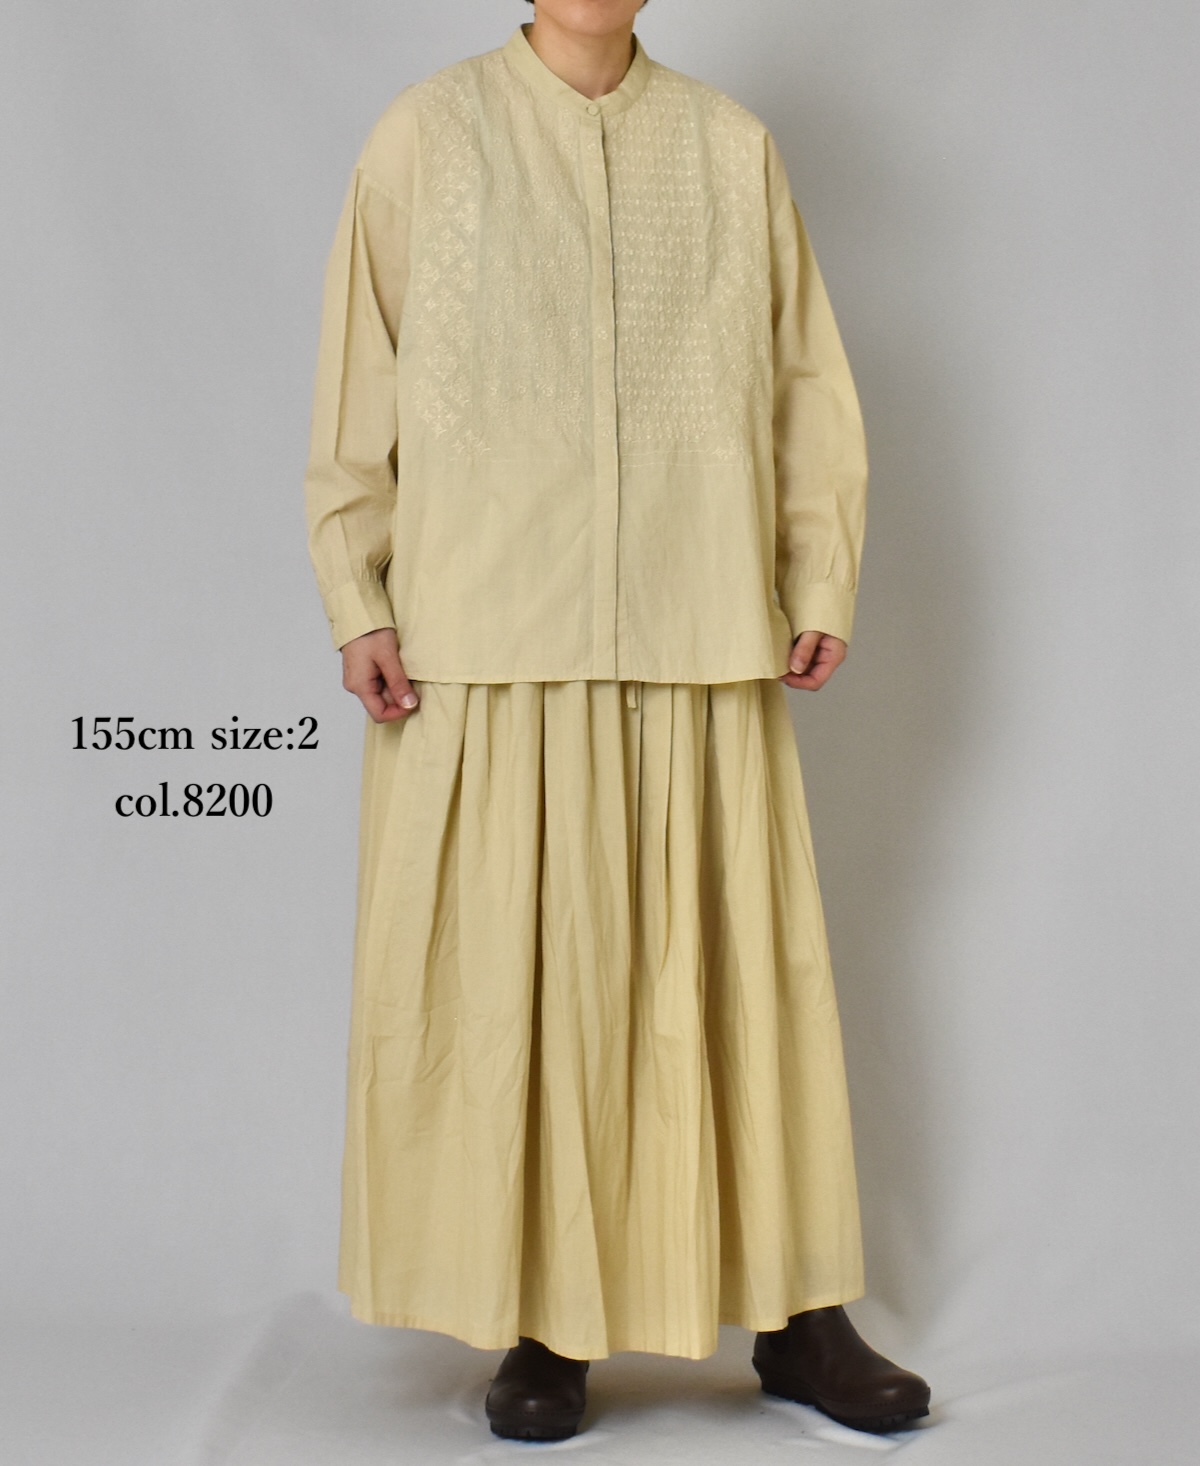 NMDS23563 (スカート) 60'S ORGANIC CAMBRIC GATHERED SKIRT WITH LINING